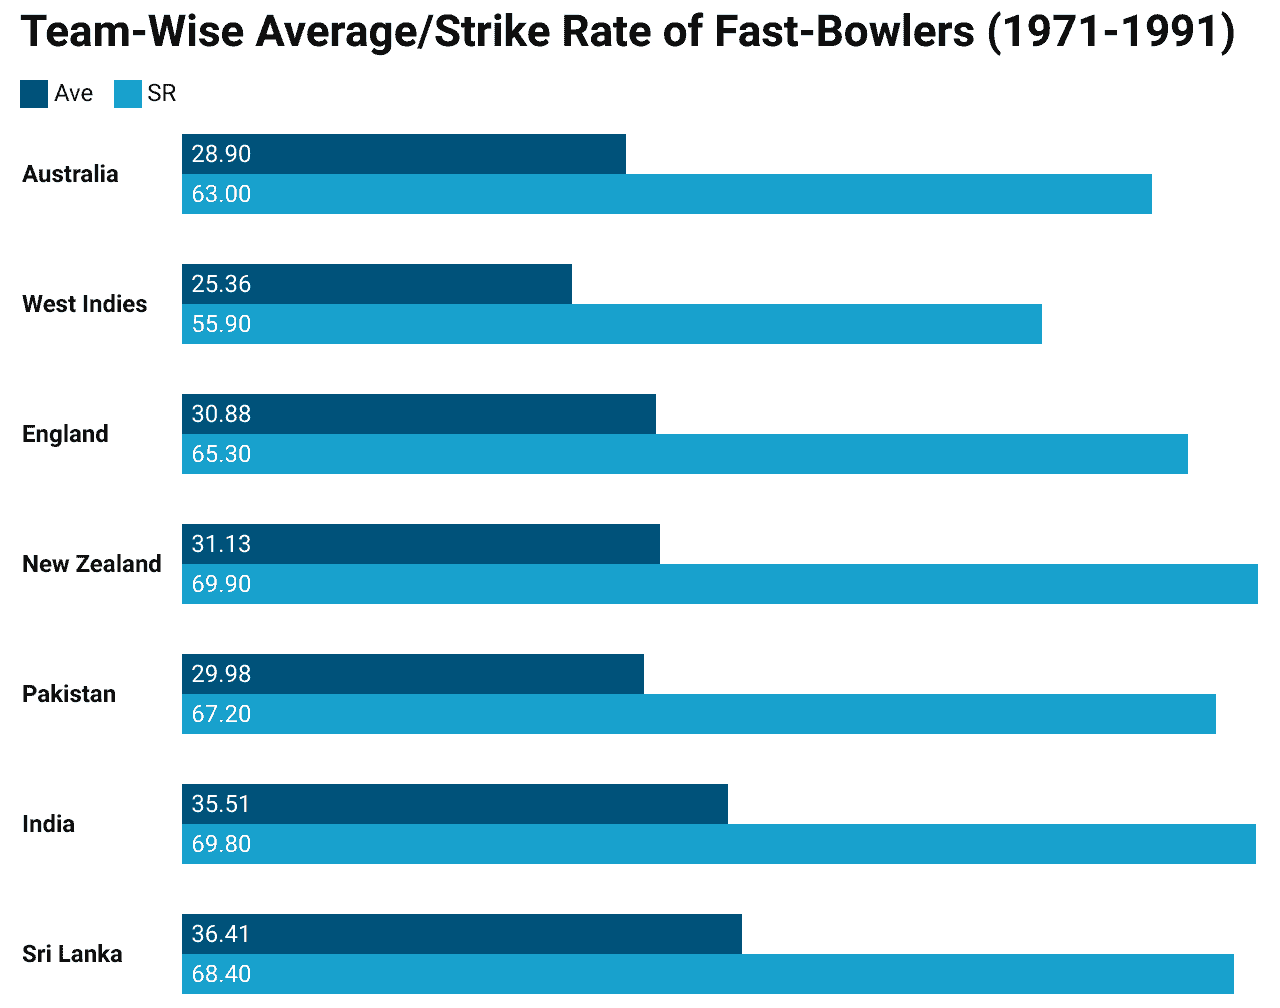 Team-Wise Bowling Average and Strike Rate of Fast Bowlers (1971-1991)